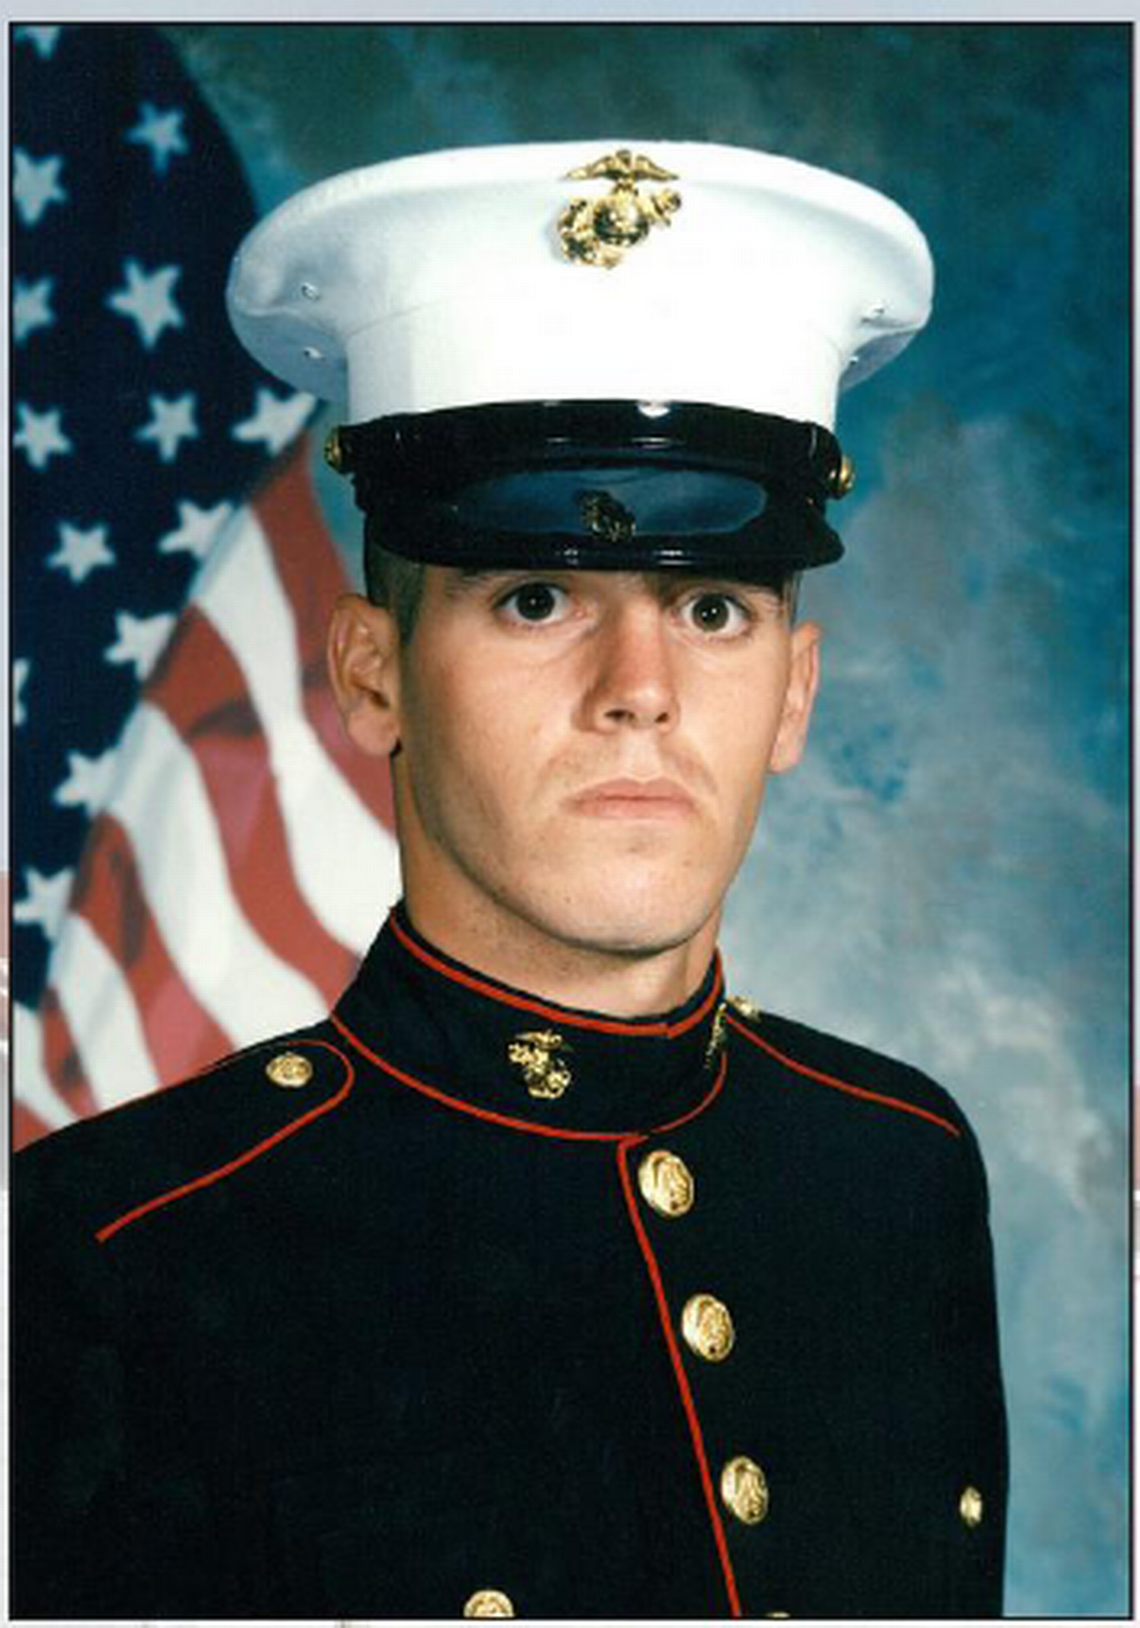 Christopher M. Tur served in the Marine Corps before coming to Guantánamo. The base newsletter, the Gazette, included this photo of him in an announcement of his Jan. 11, 2015, death. Image courtesy of McClatchy.